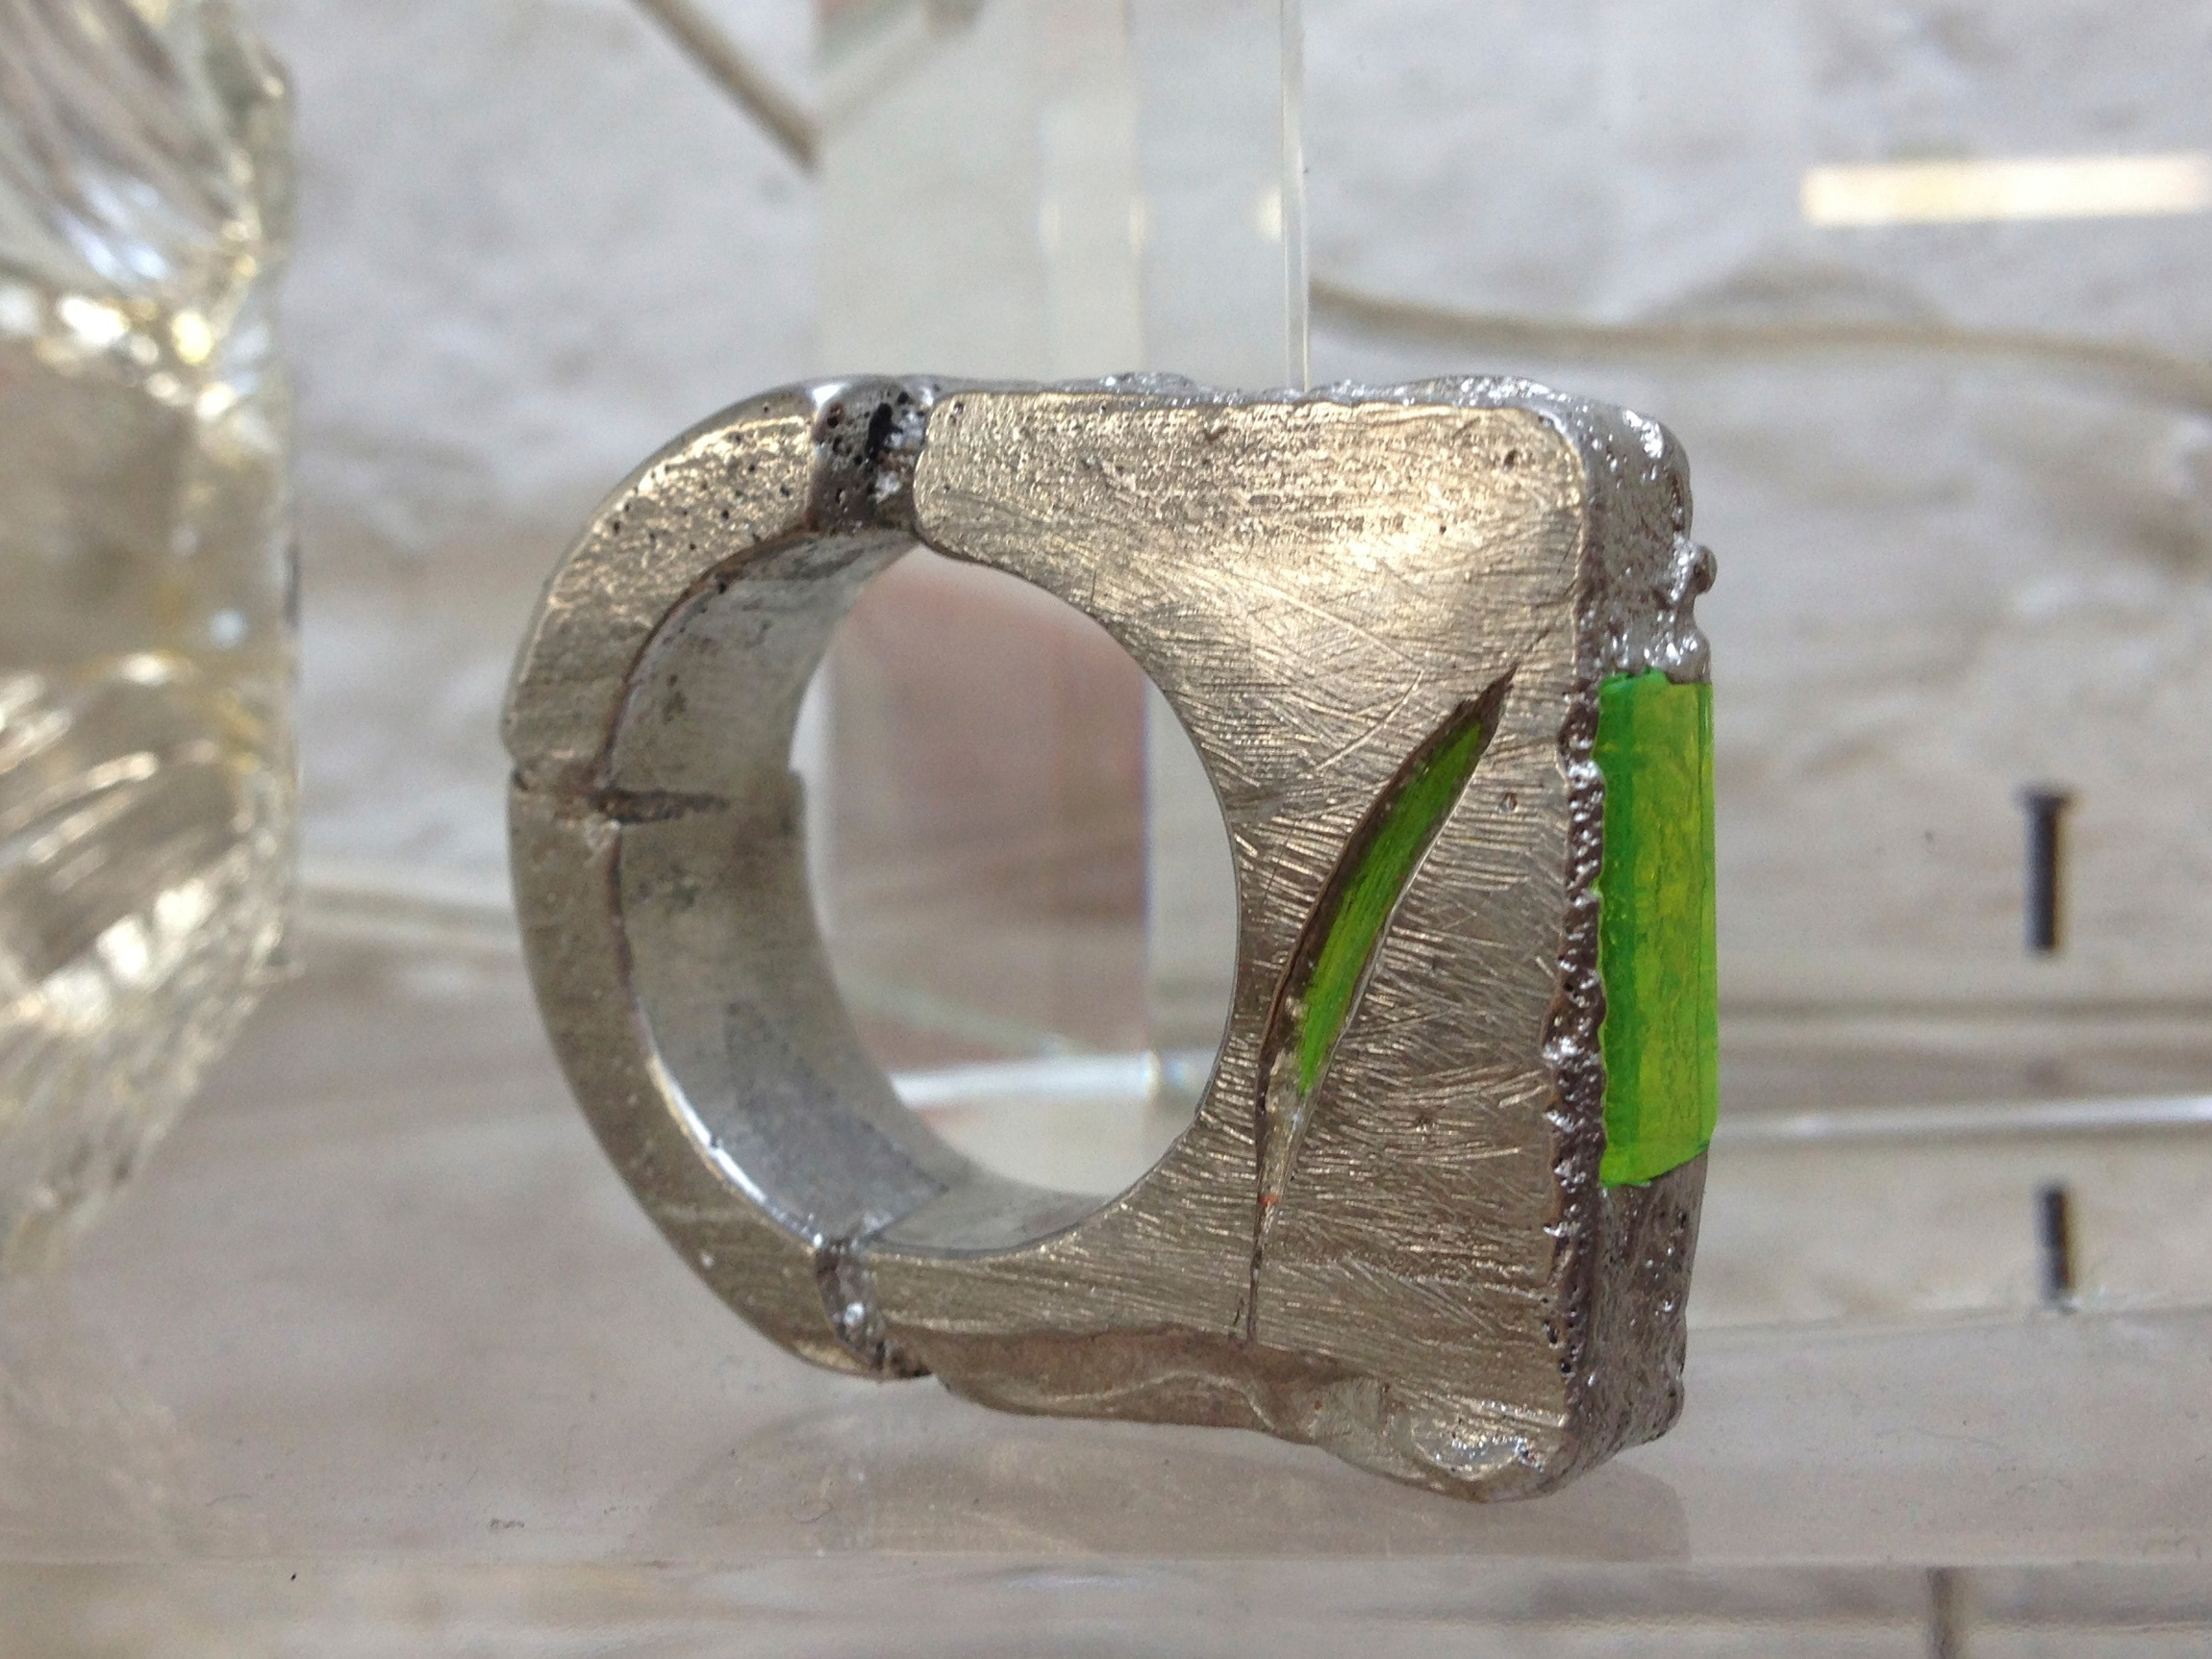 studio casting techniques with inclusions: pewter with acrylic